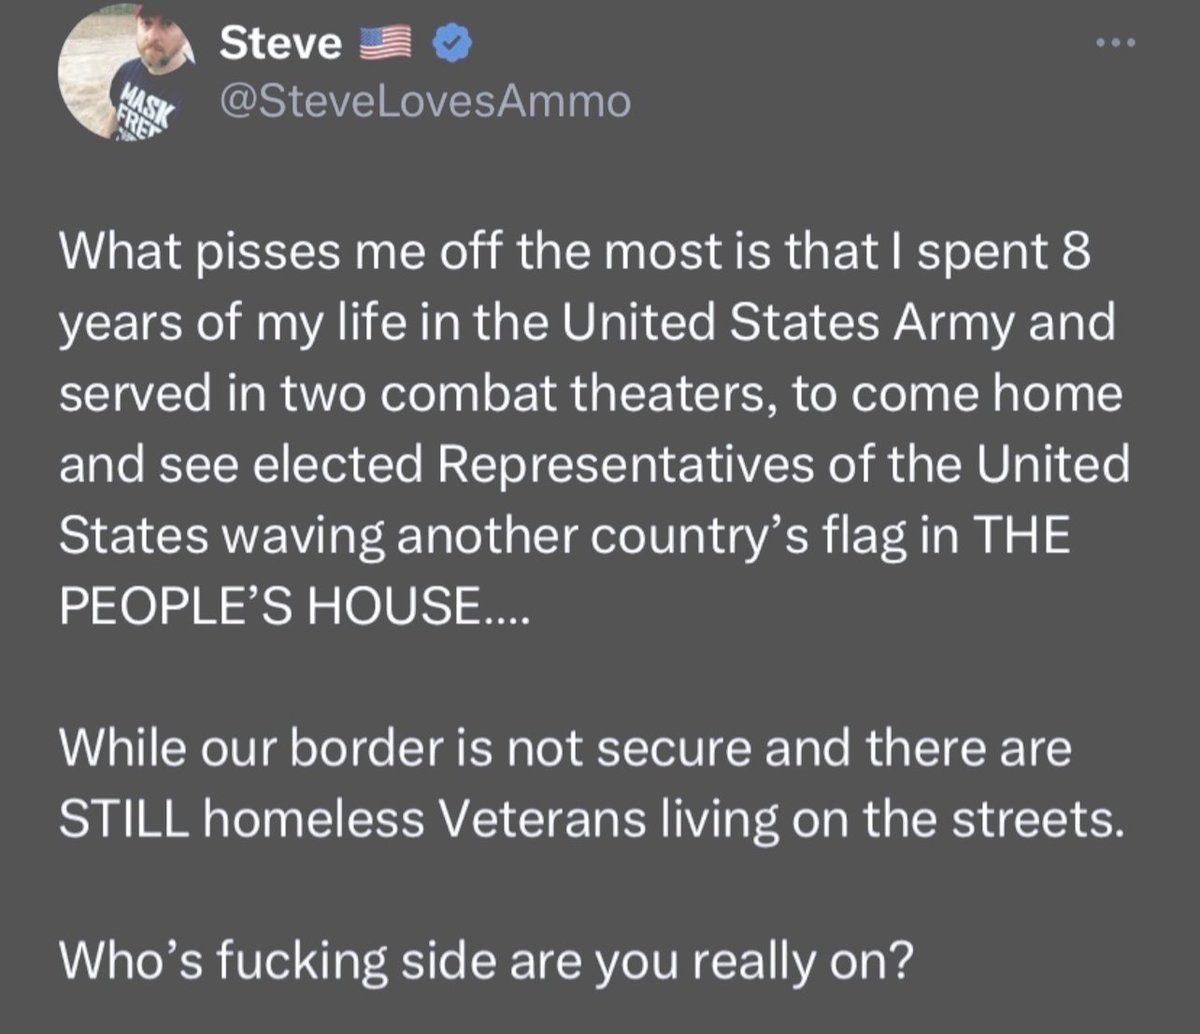 I’ve gotta’ say, I agree with Steve 100%. Thank you for your service Steve. Sorry our country has turned into a bunch of traitors, sellouts, money launderers, cheats, criminals and treasonous pigs. Who agrees with Steve? 👇🙋‍♂️